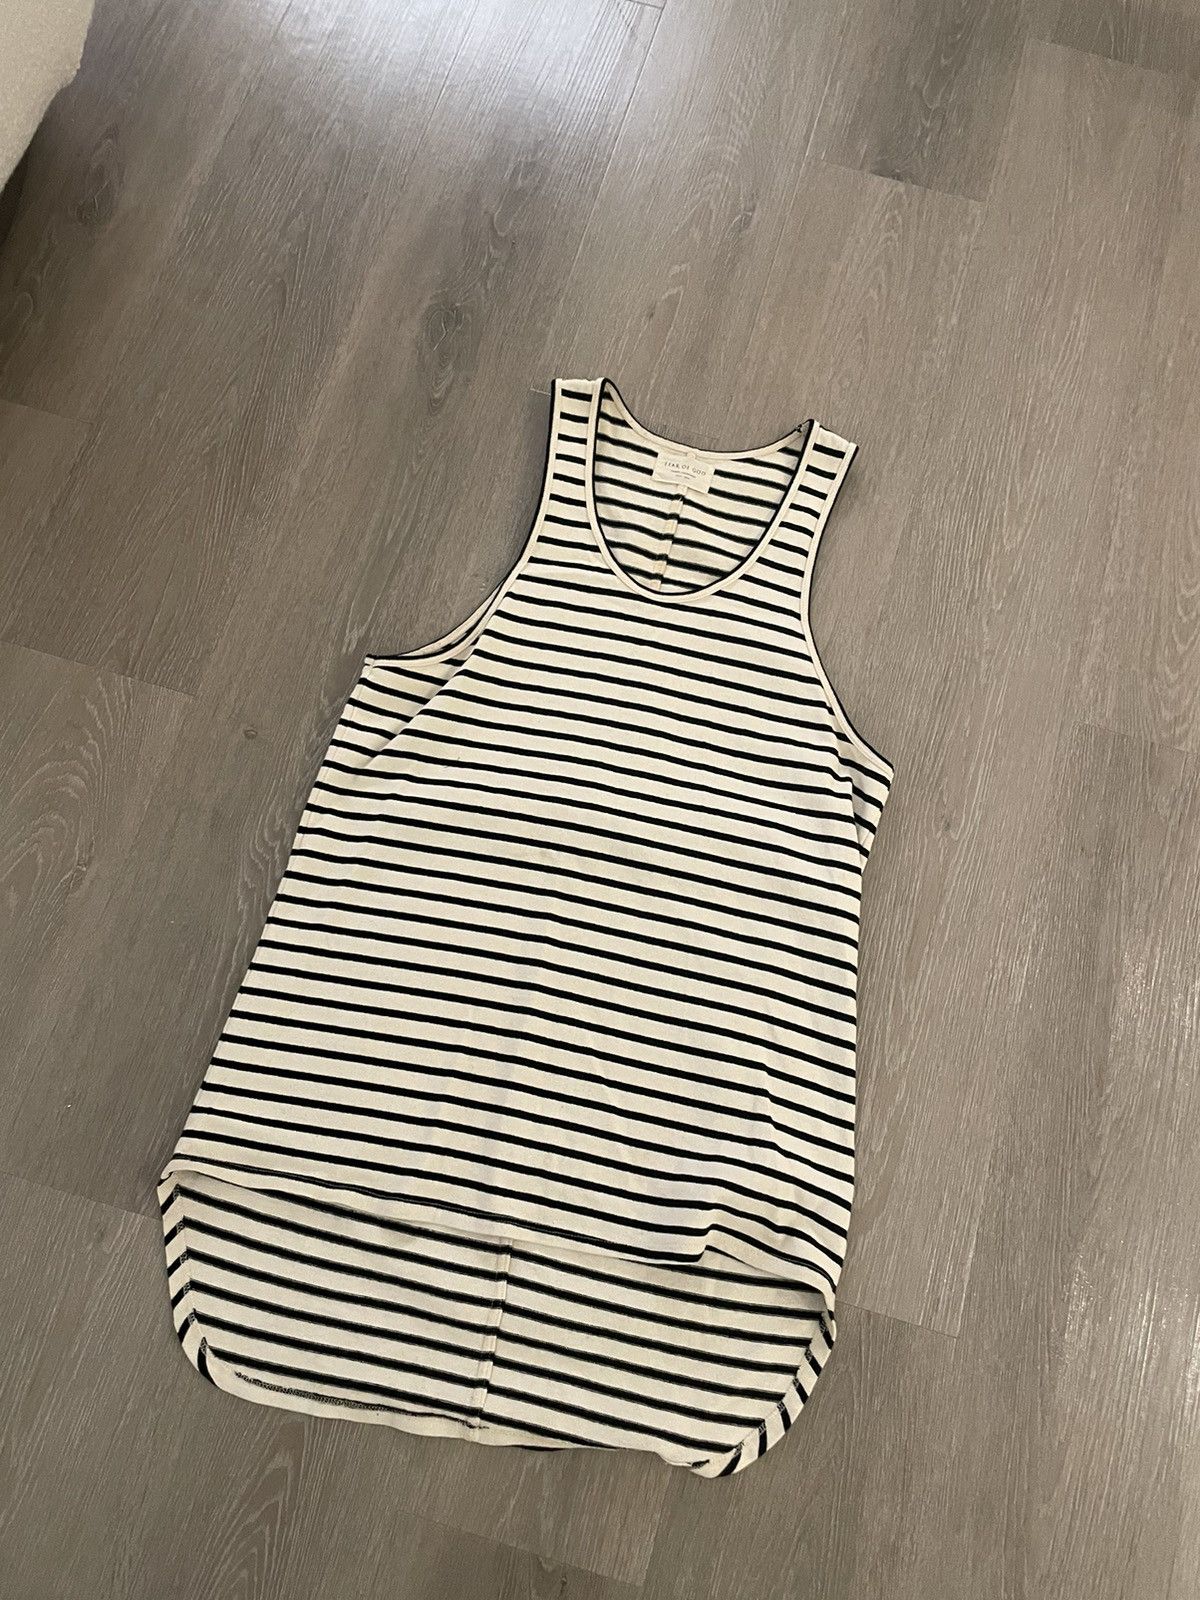 Fear of God Fear of god fourth collection stripe long tank top | Grailed